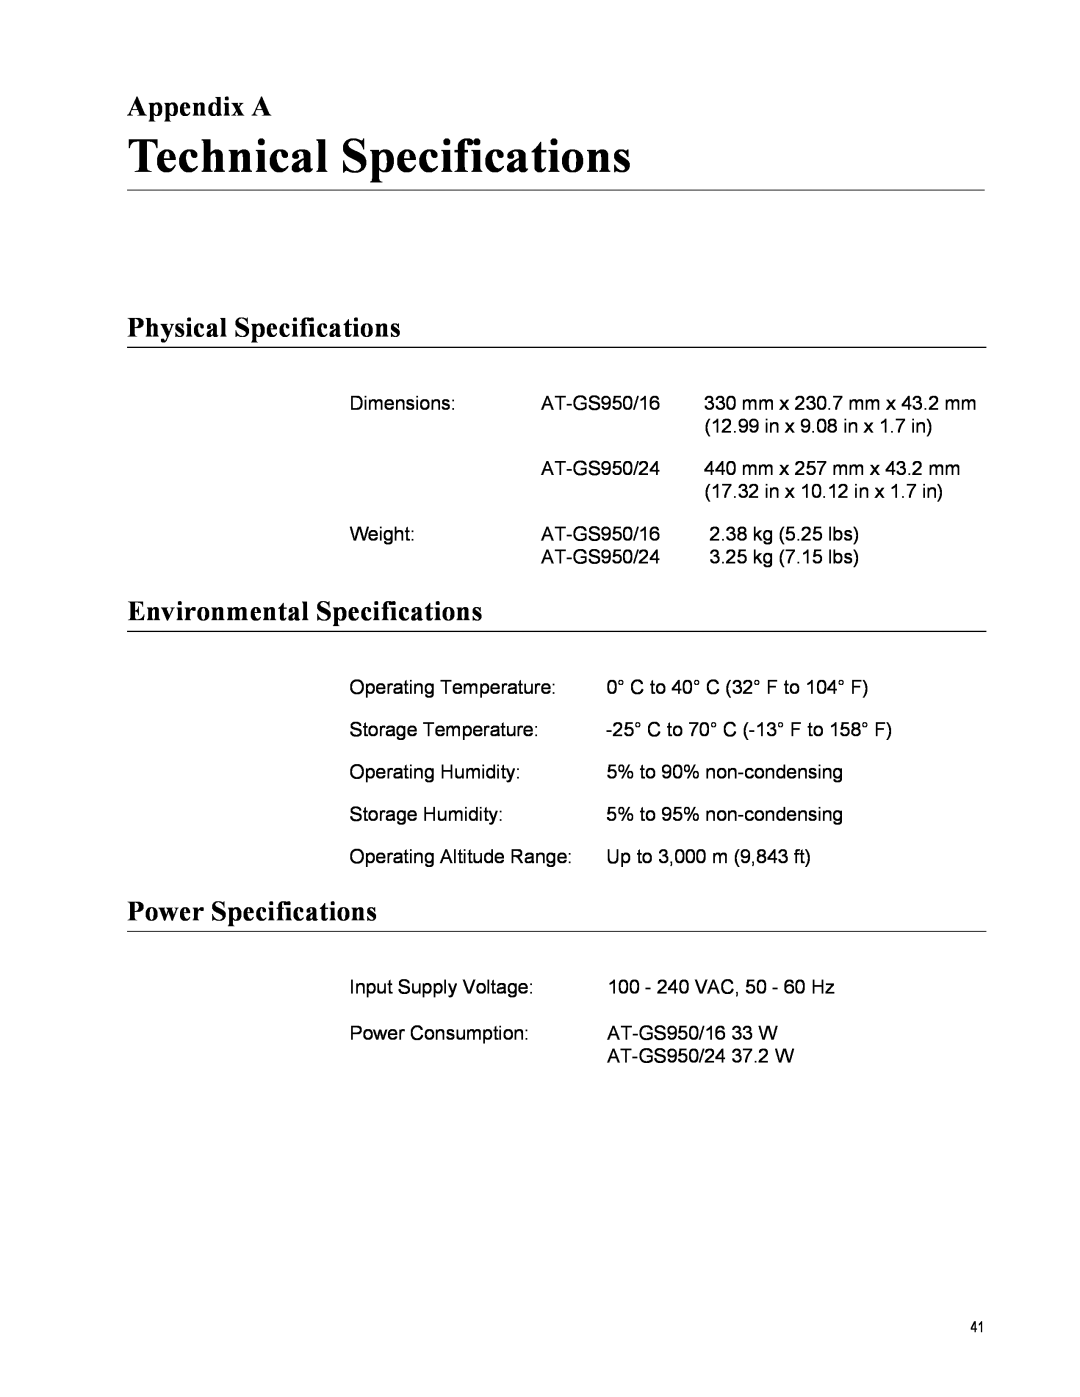 Allied Telesis AT-GS950/16-10 Technical Specifications, Appendix A, Physical Specifications, Environmental Specifications 